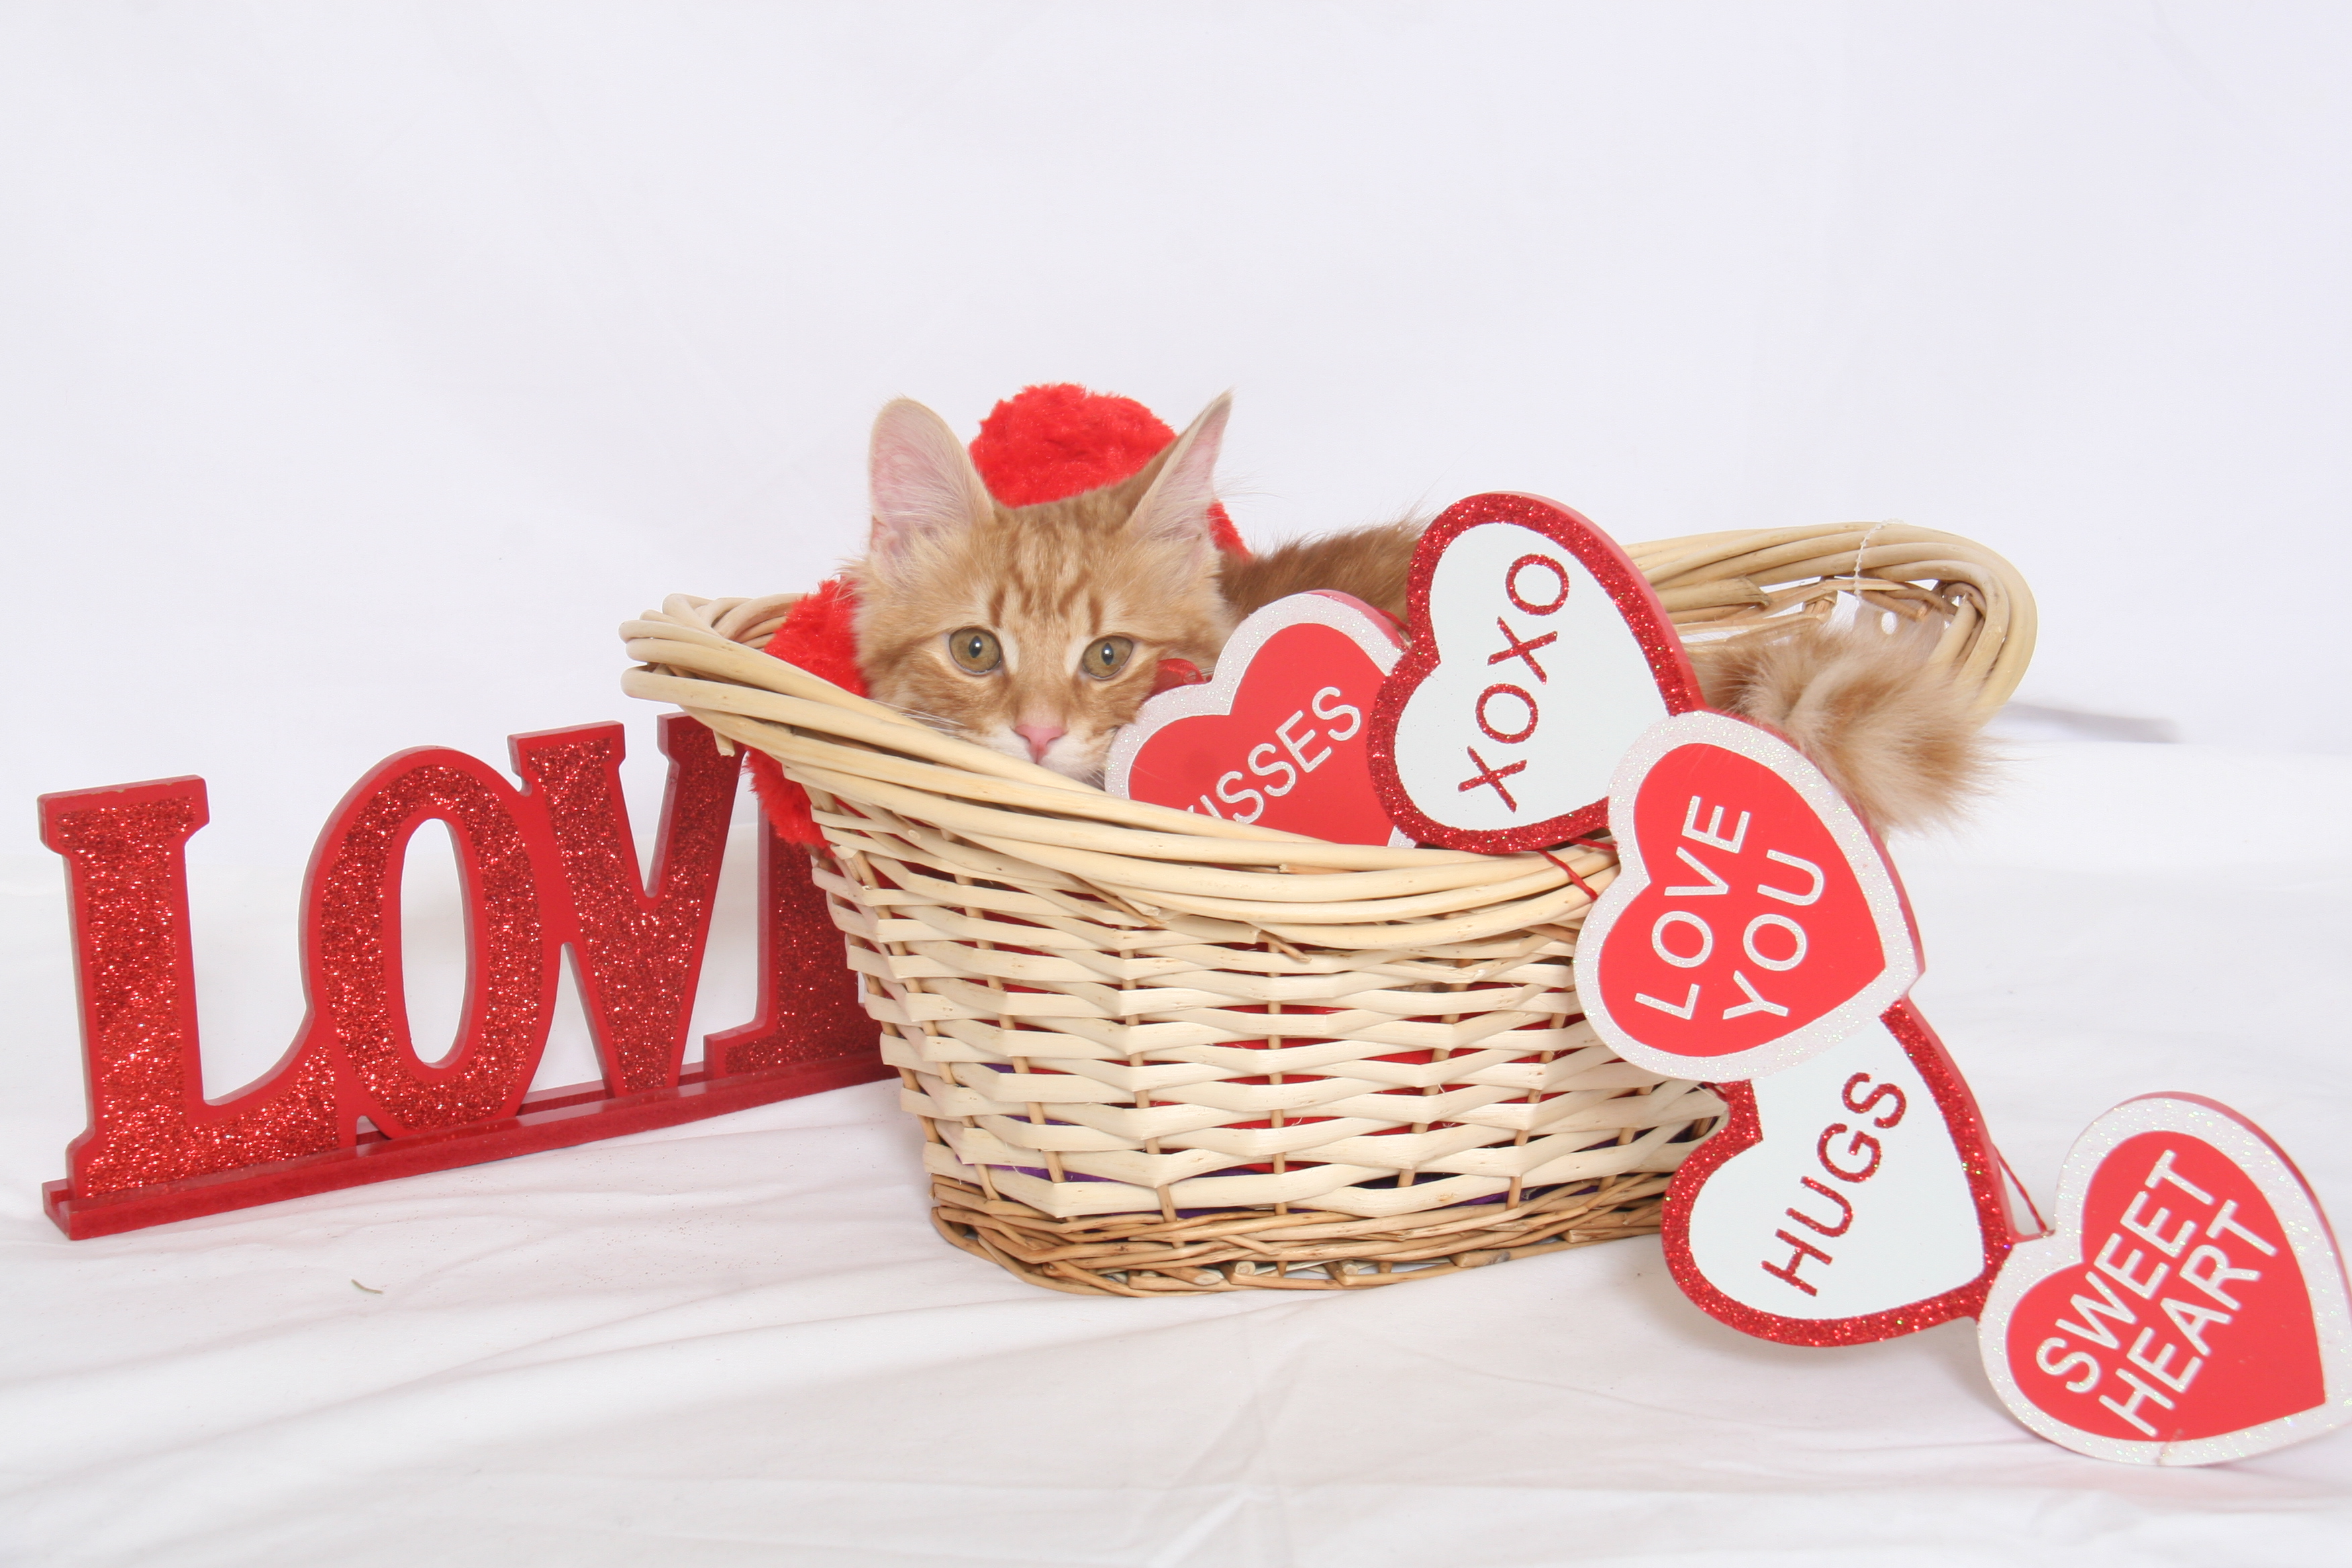 Mommy's Basket of Love